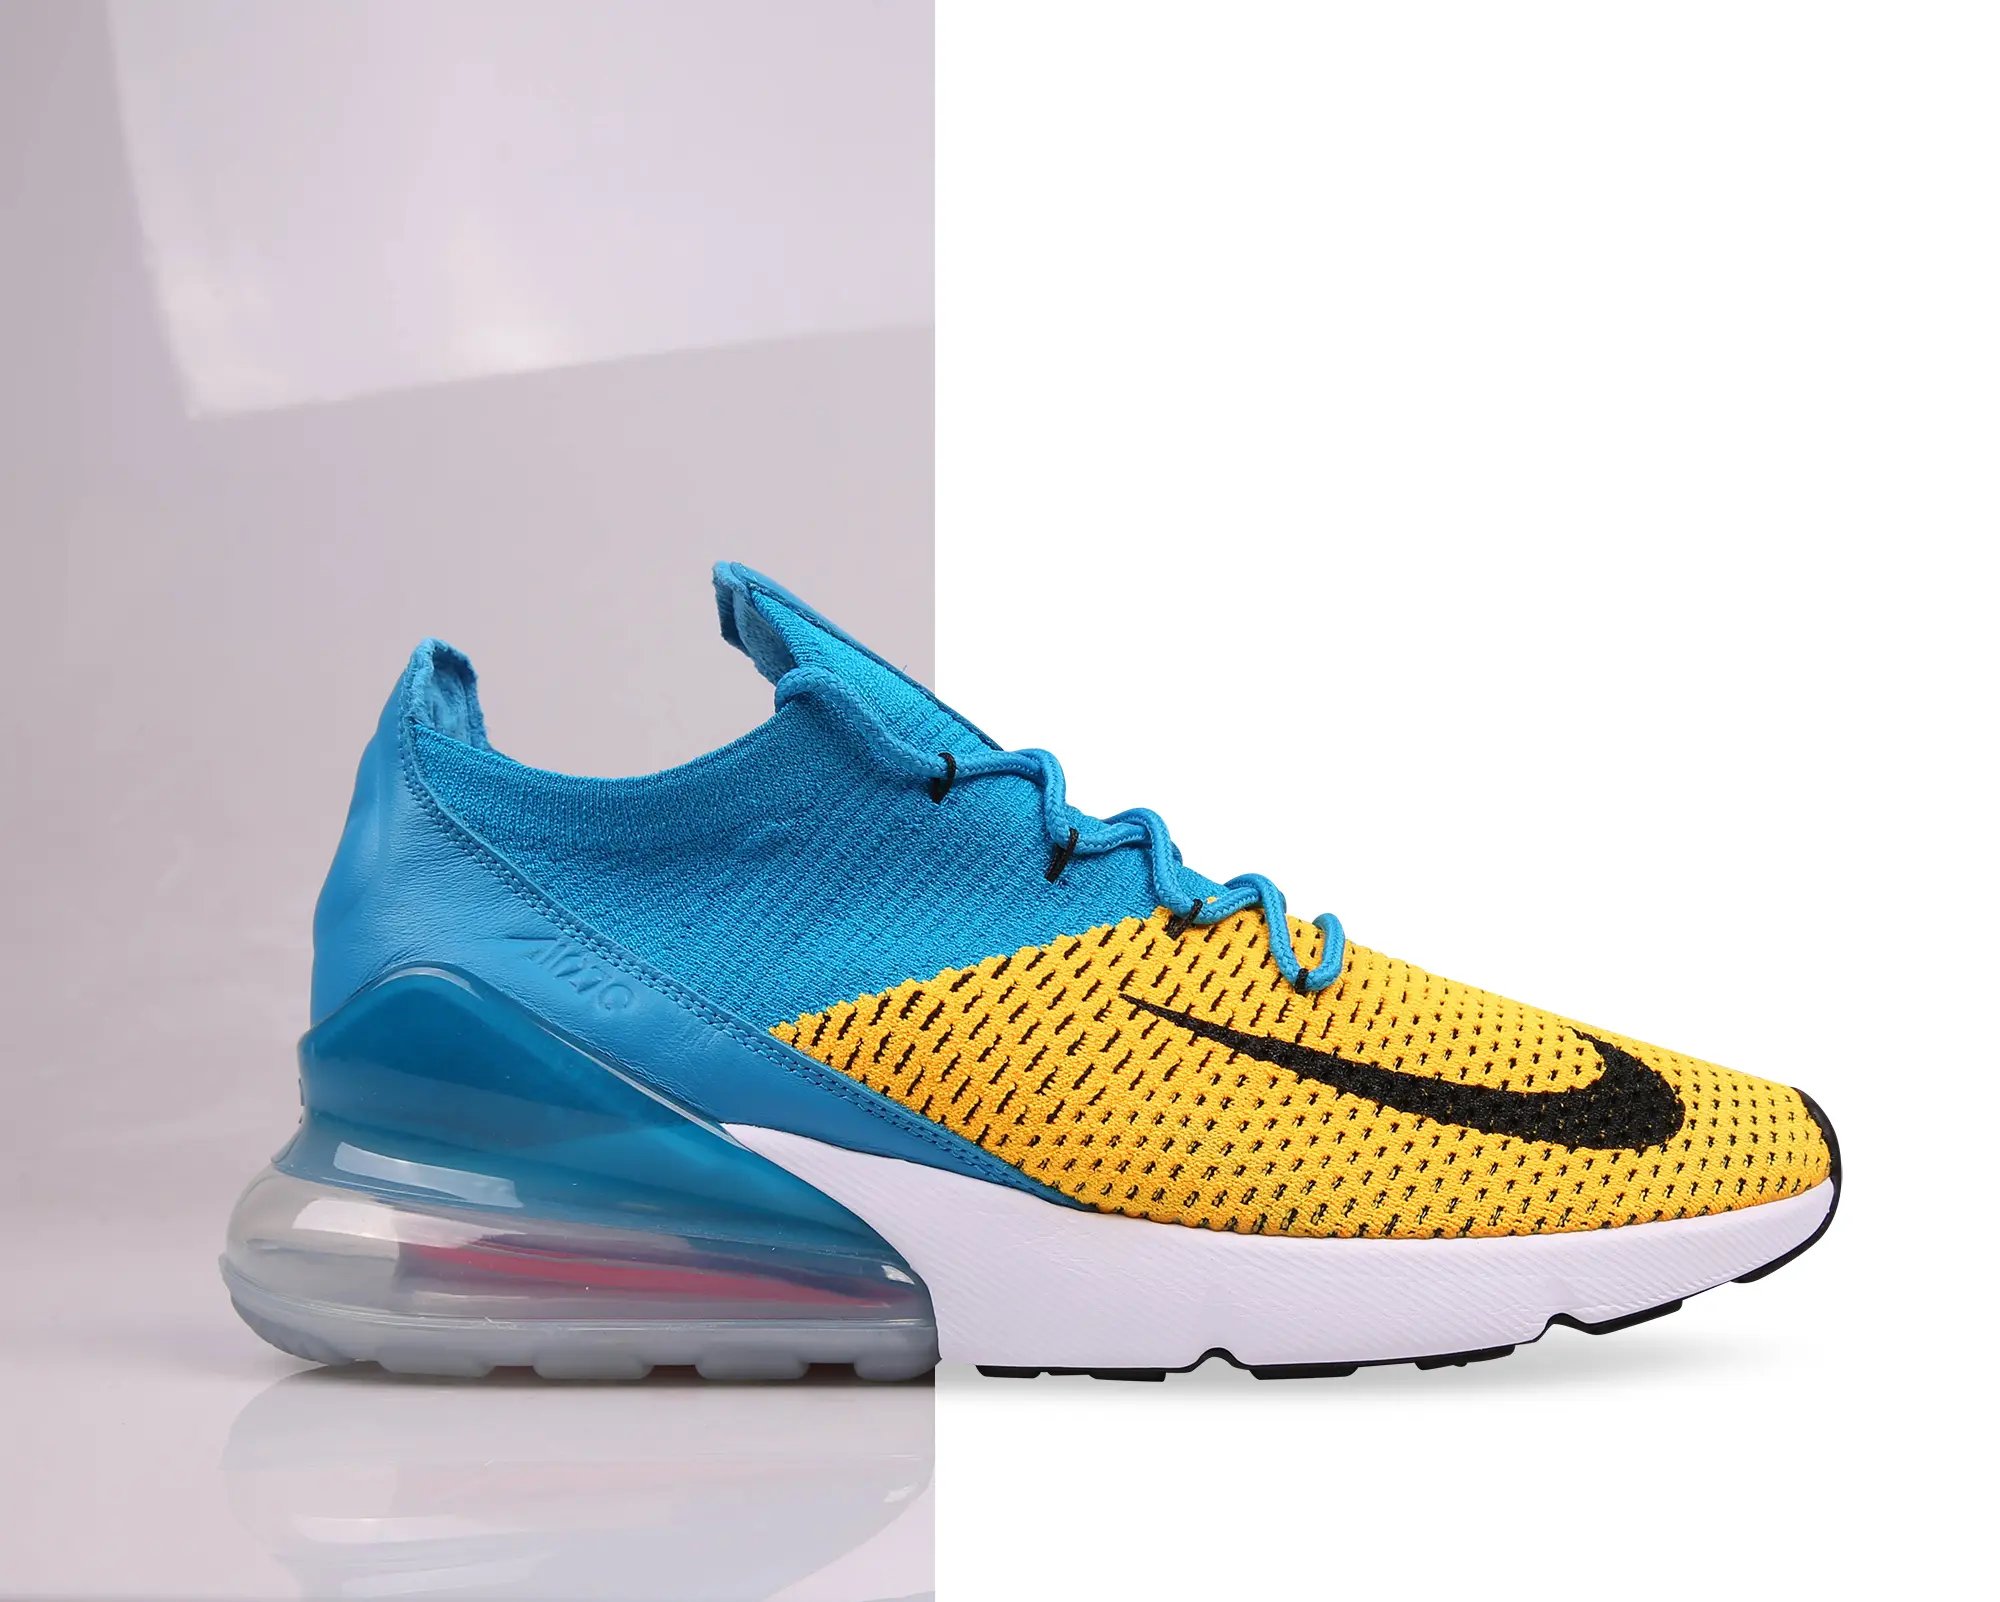 Footwear Clipping Path Services